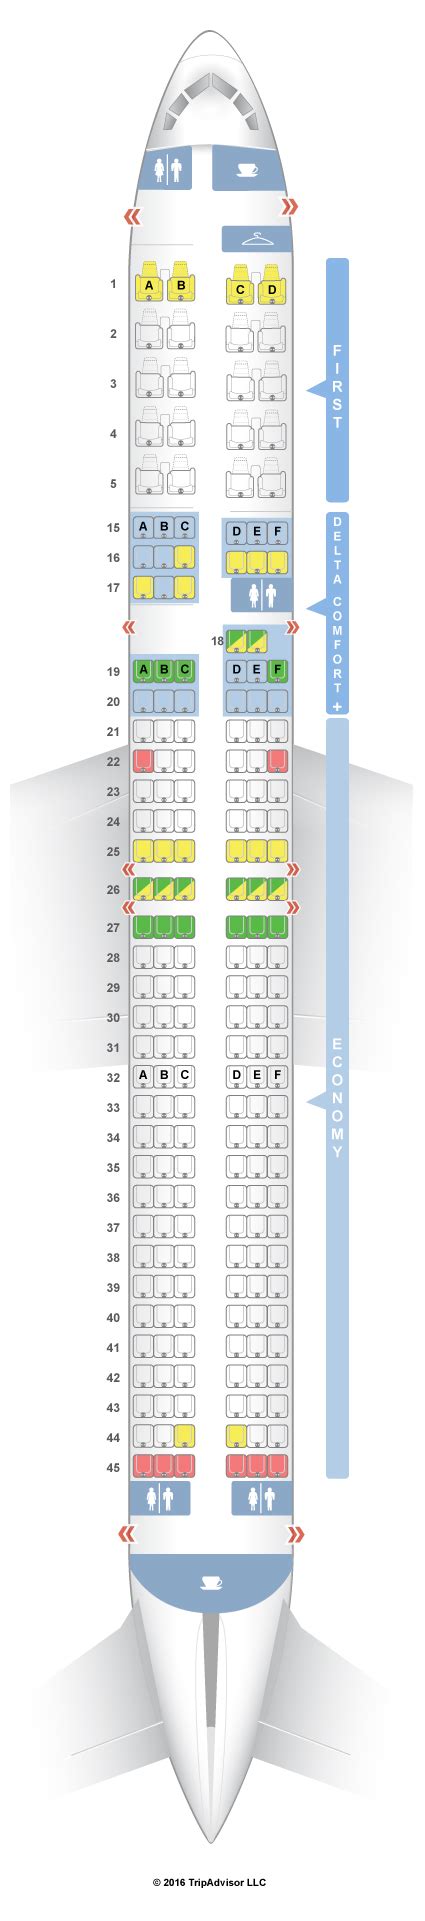 757 delta plane seating. Things To Know About 757 delta plane seating. 